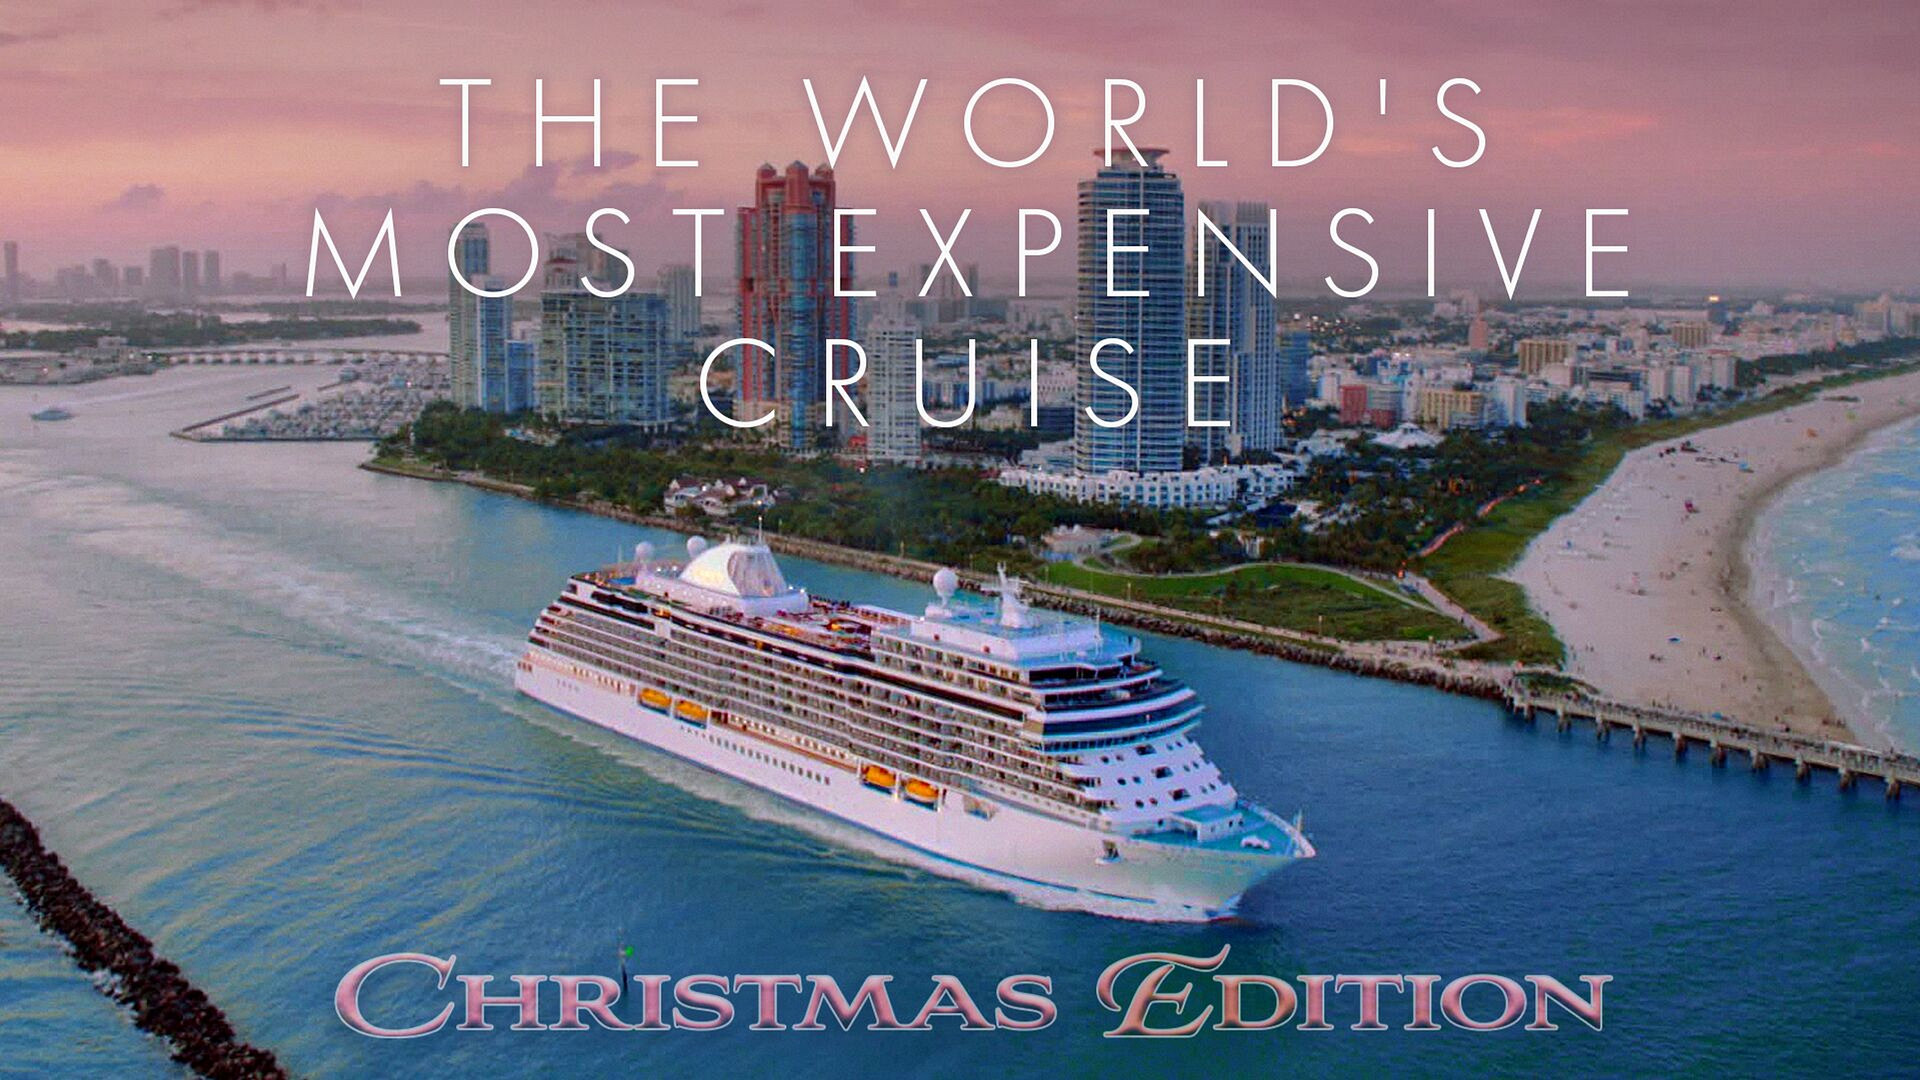 The World's Most Expensive Cruise: Christmas Edition